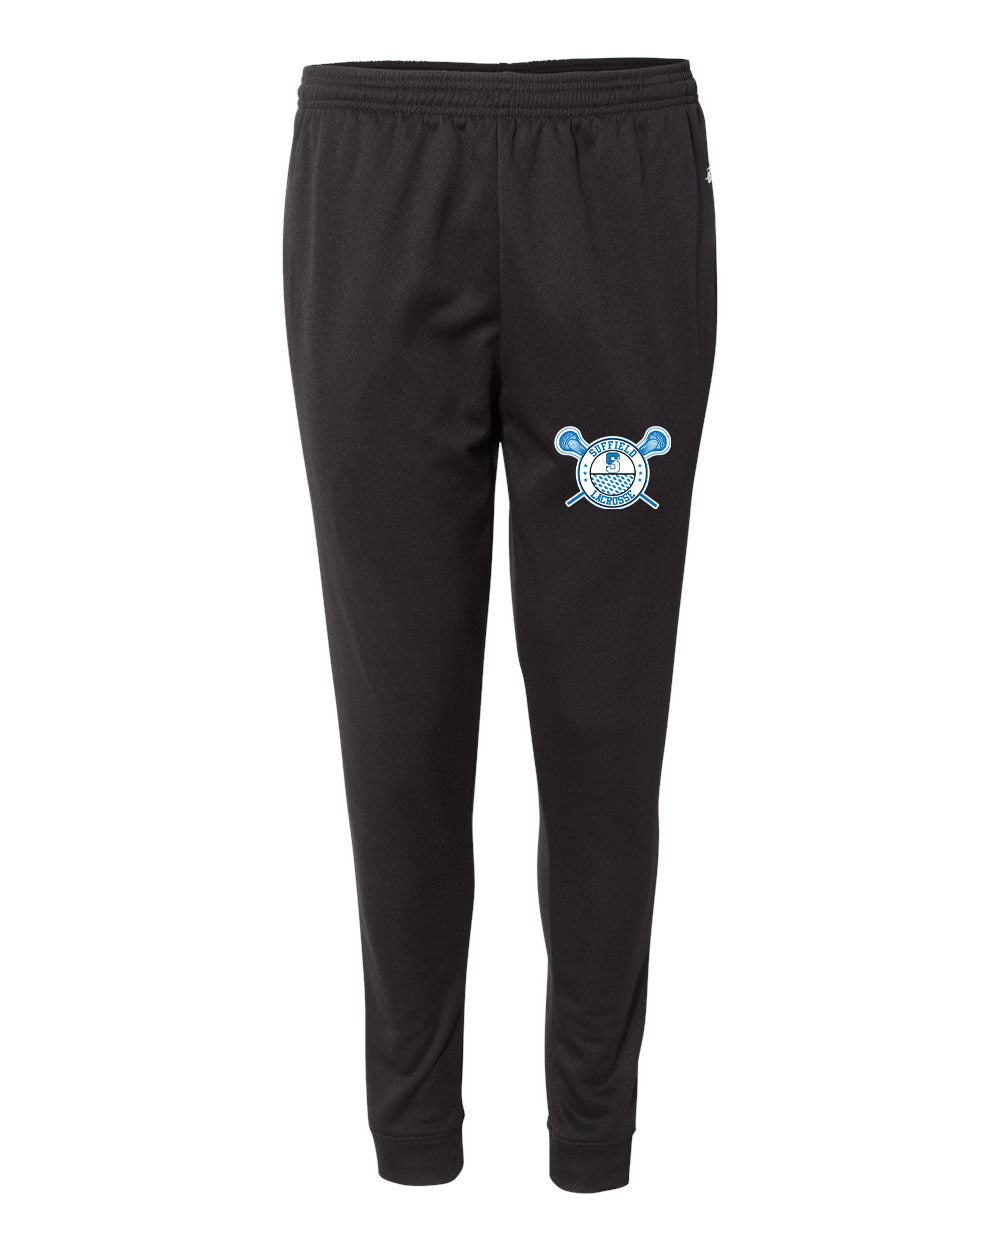 Suffield Youth Lacrosse - Adult Joggers "Circle" - 1475 (color options available)